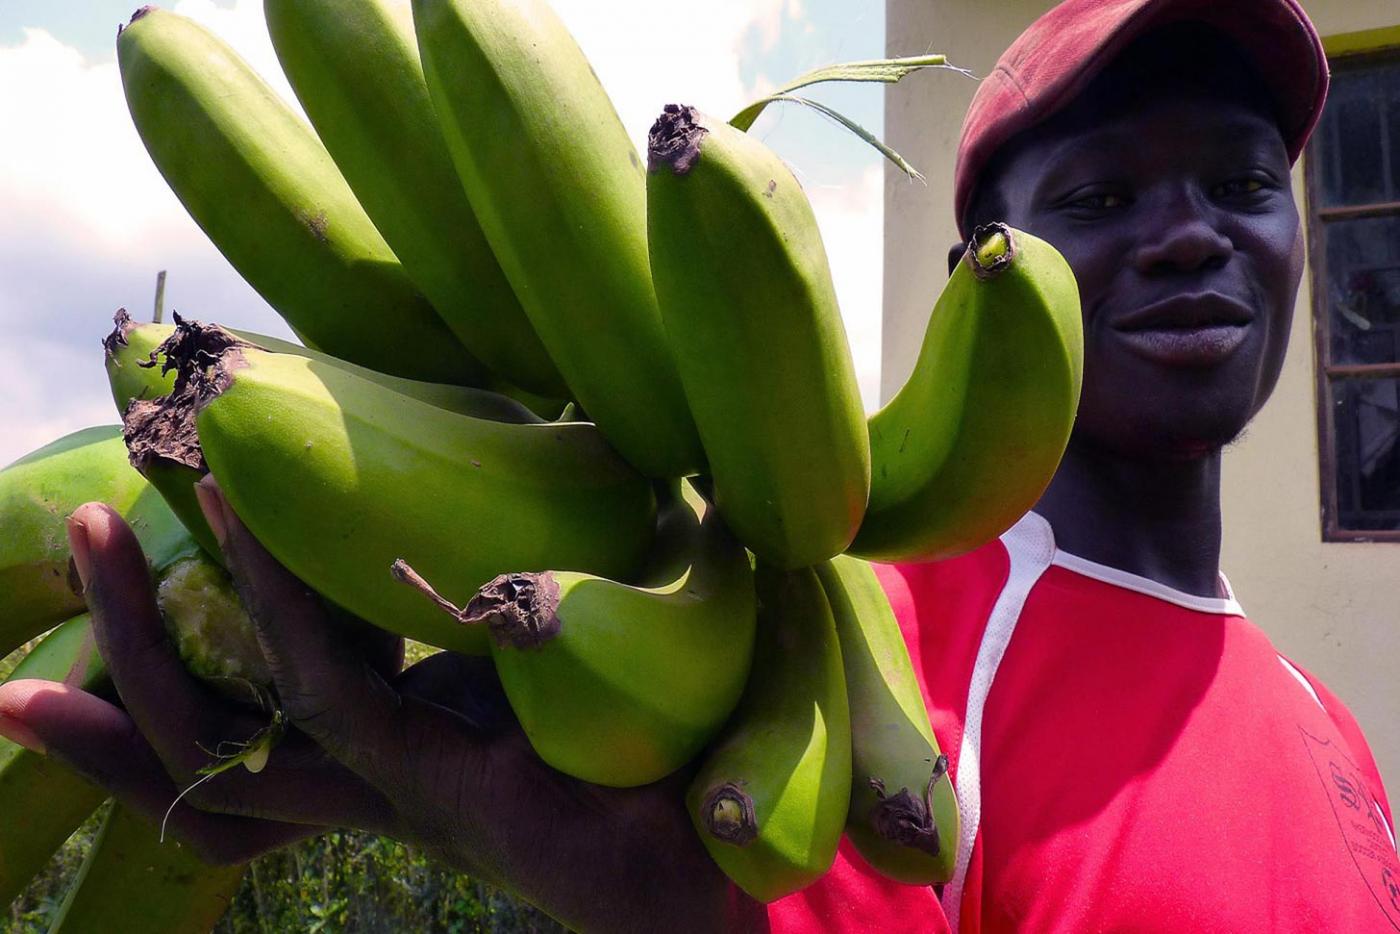 A Ugandan man harvests &quot;matooke&quot; - known as &#039;food banana&#039; - from his garden in southwestern Uganda.